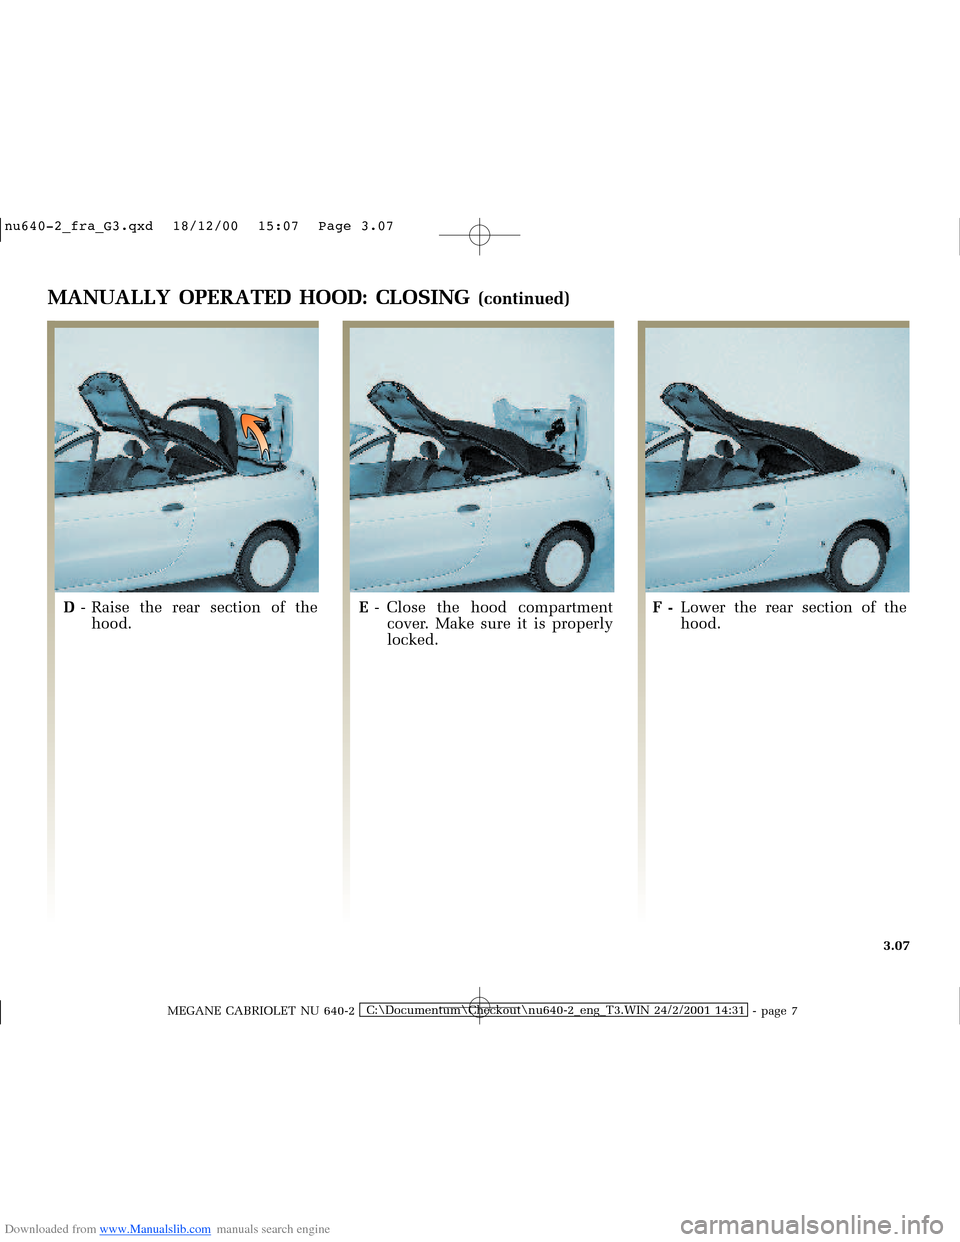 RENAULT MEGANE 2000 X64 / 1.G Manual Online Downloaded from www.Manualslib.com manuals search engine �Q�X������B�I�U�D�B�*���T�[�G� � ��������� � ������ � �3�D�J�H� ����
MEGANE CABRIOLET NU 640-2C:\Documentum\Chec